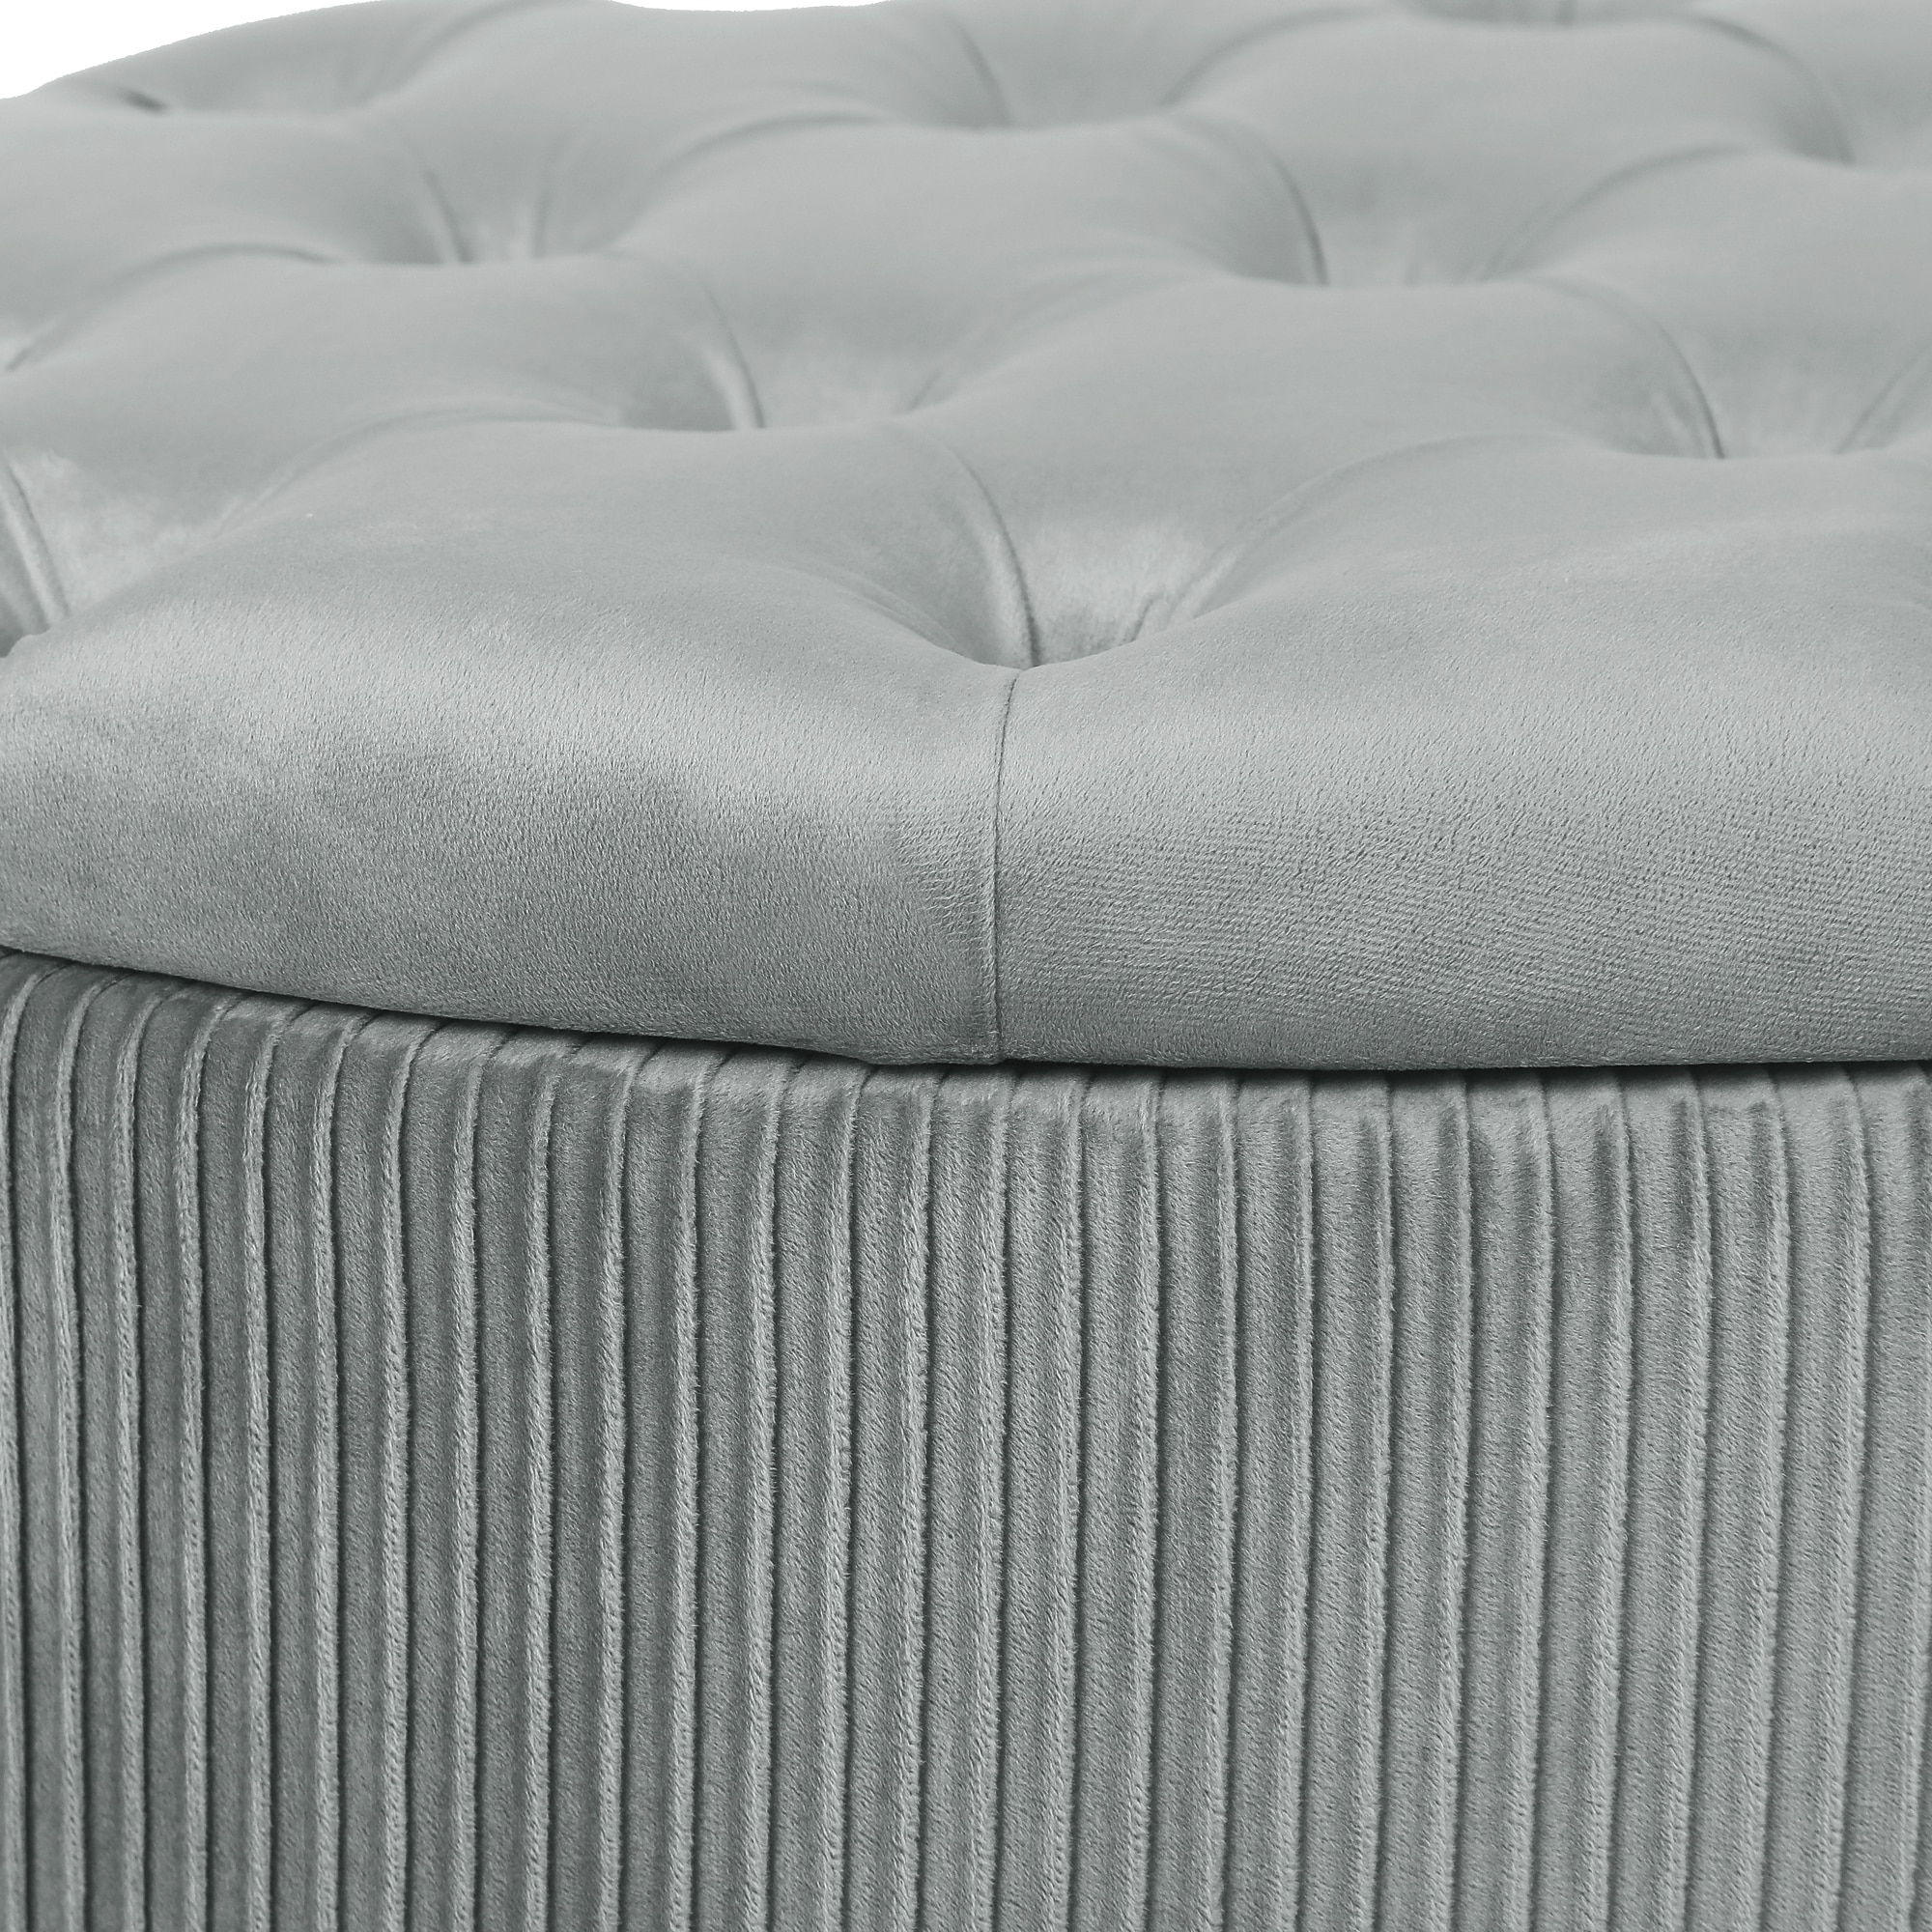 https://ak1.ostkcdn.com/images/products/is/images/direct/1beddb17b210a9ad81959c84f485f8a3d0fb841a/Adeco-Round-Storage-Ottoman-Button-Tufted-Footrest-Stool-Bench.jpg